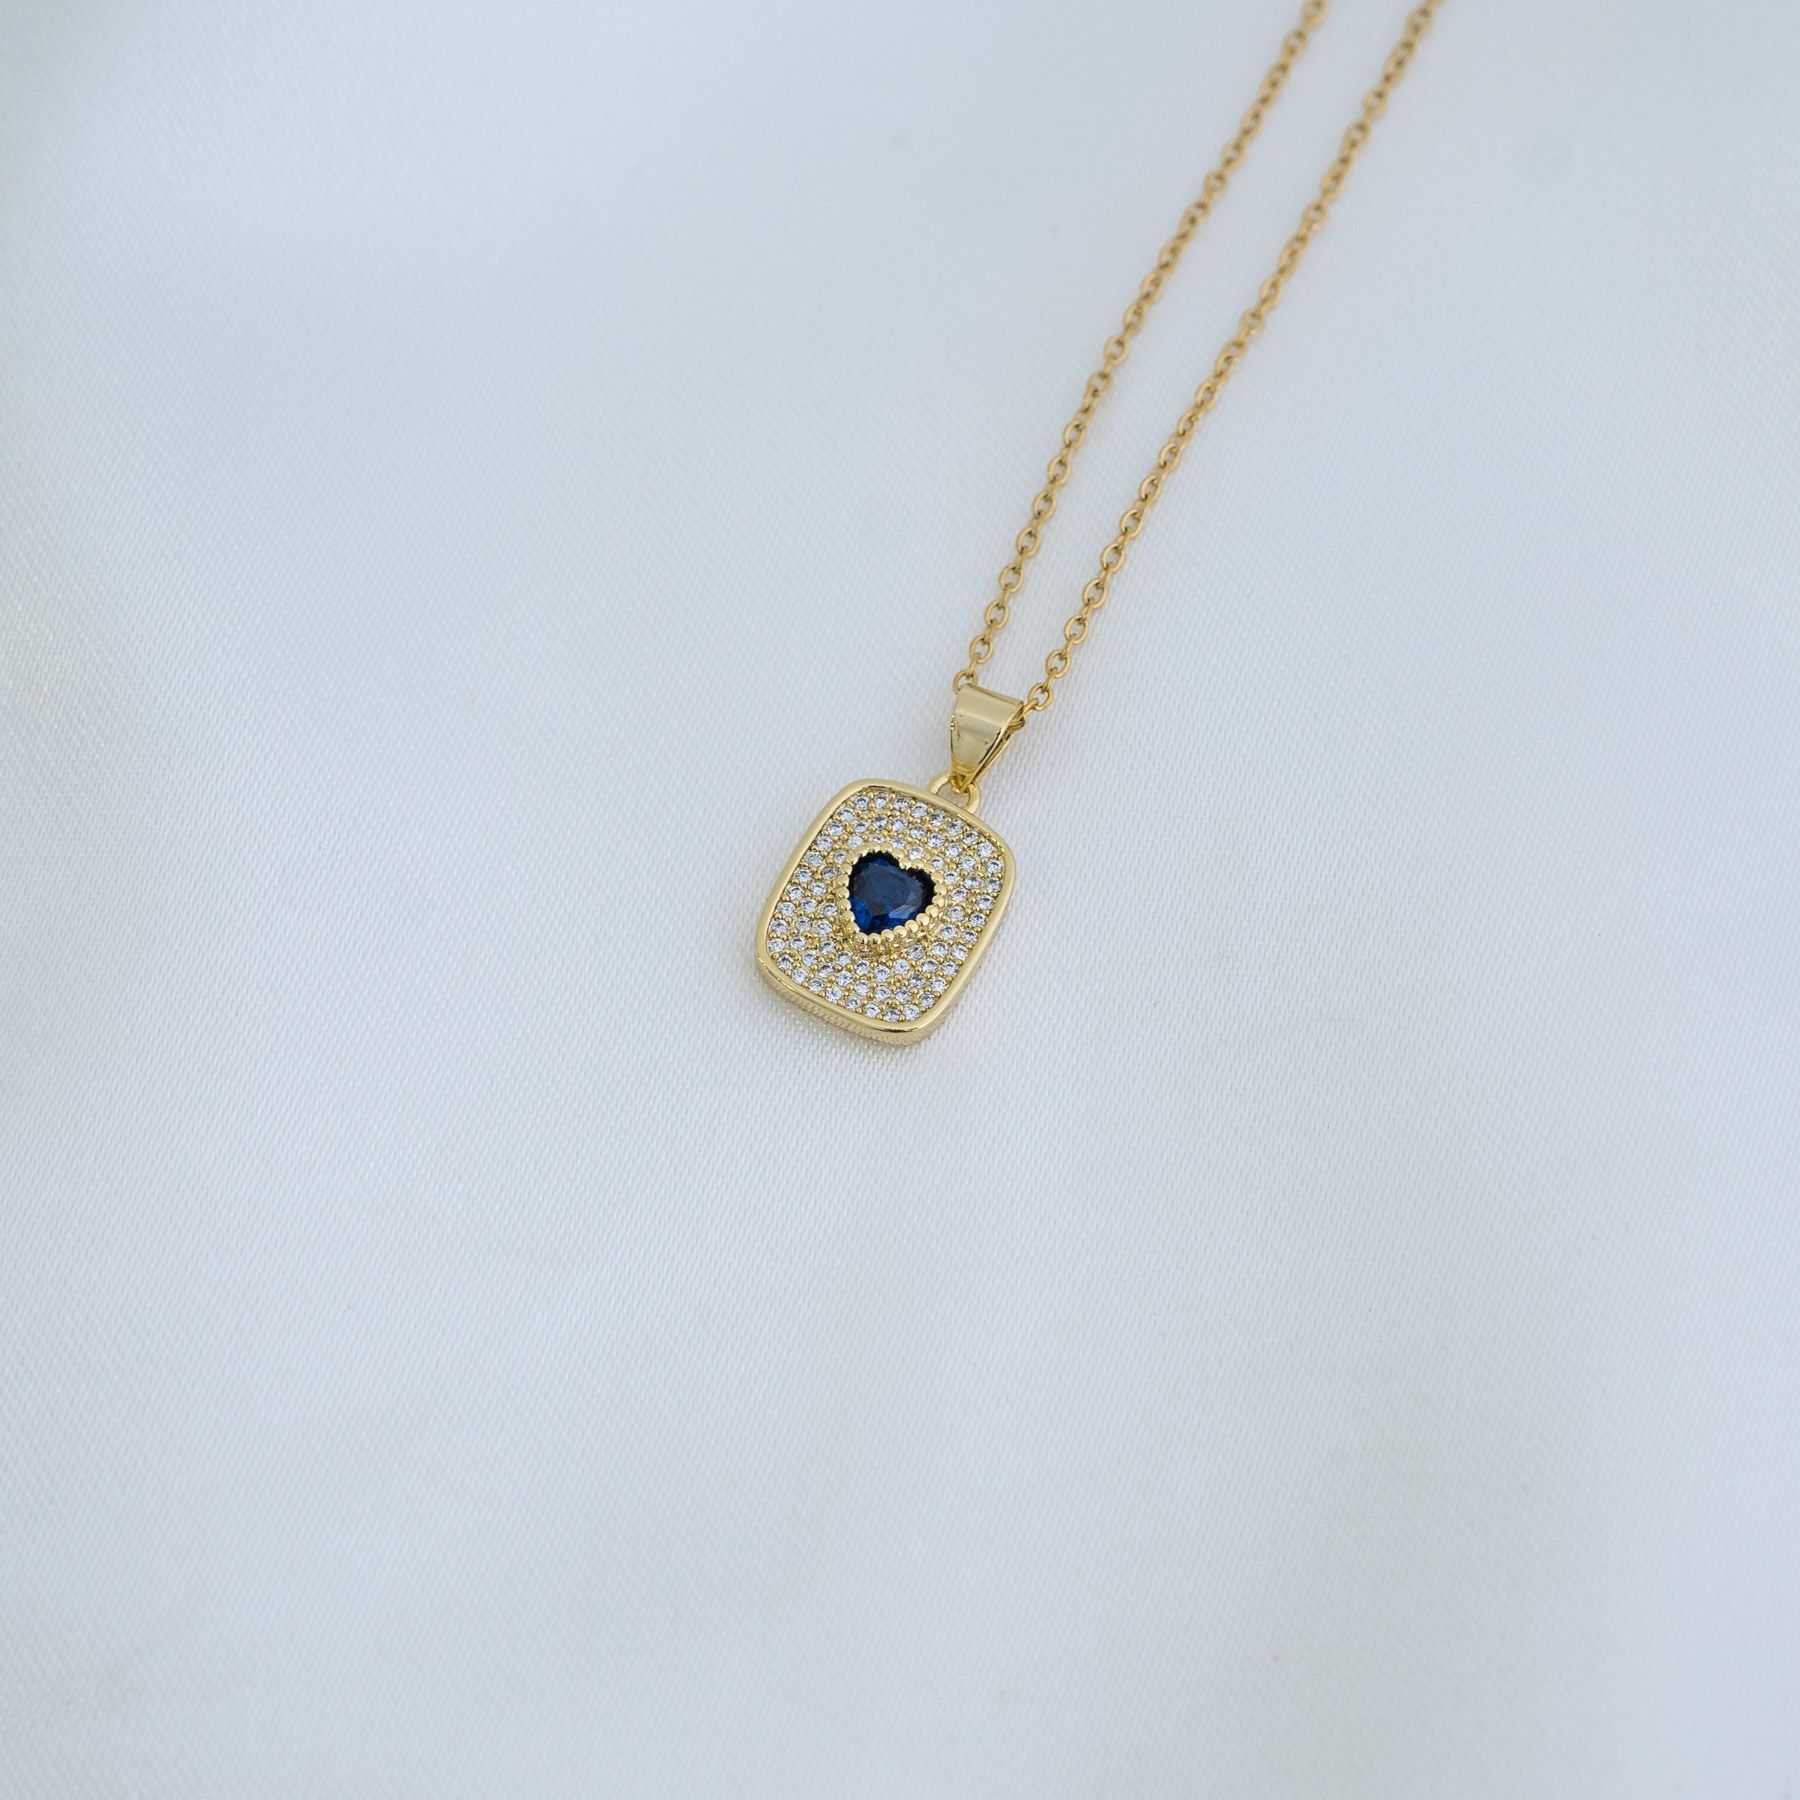 I LOVE YOU NECKLACE - GOLD & BLUE